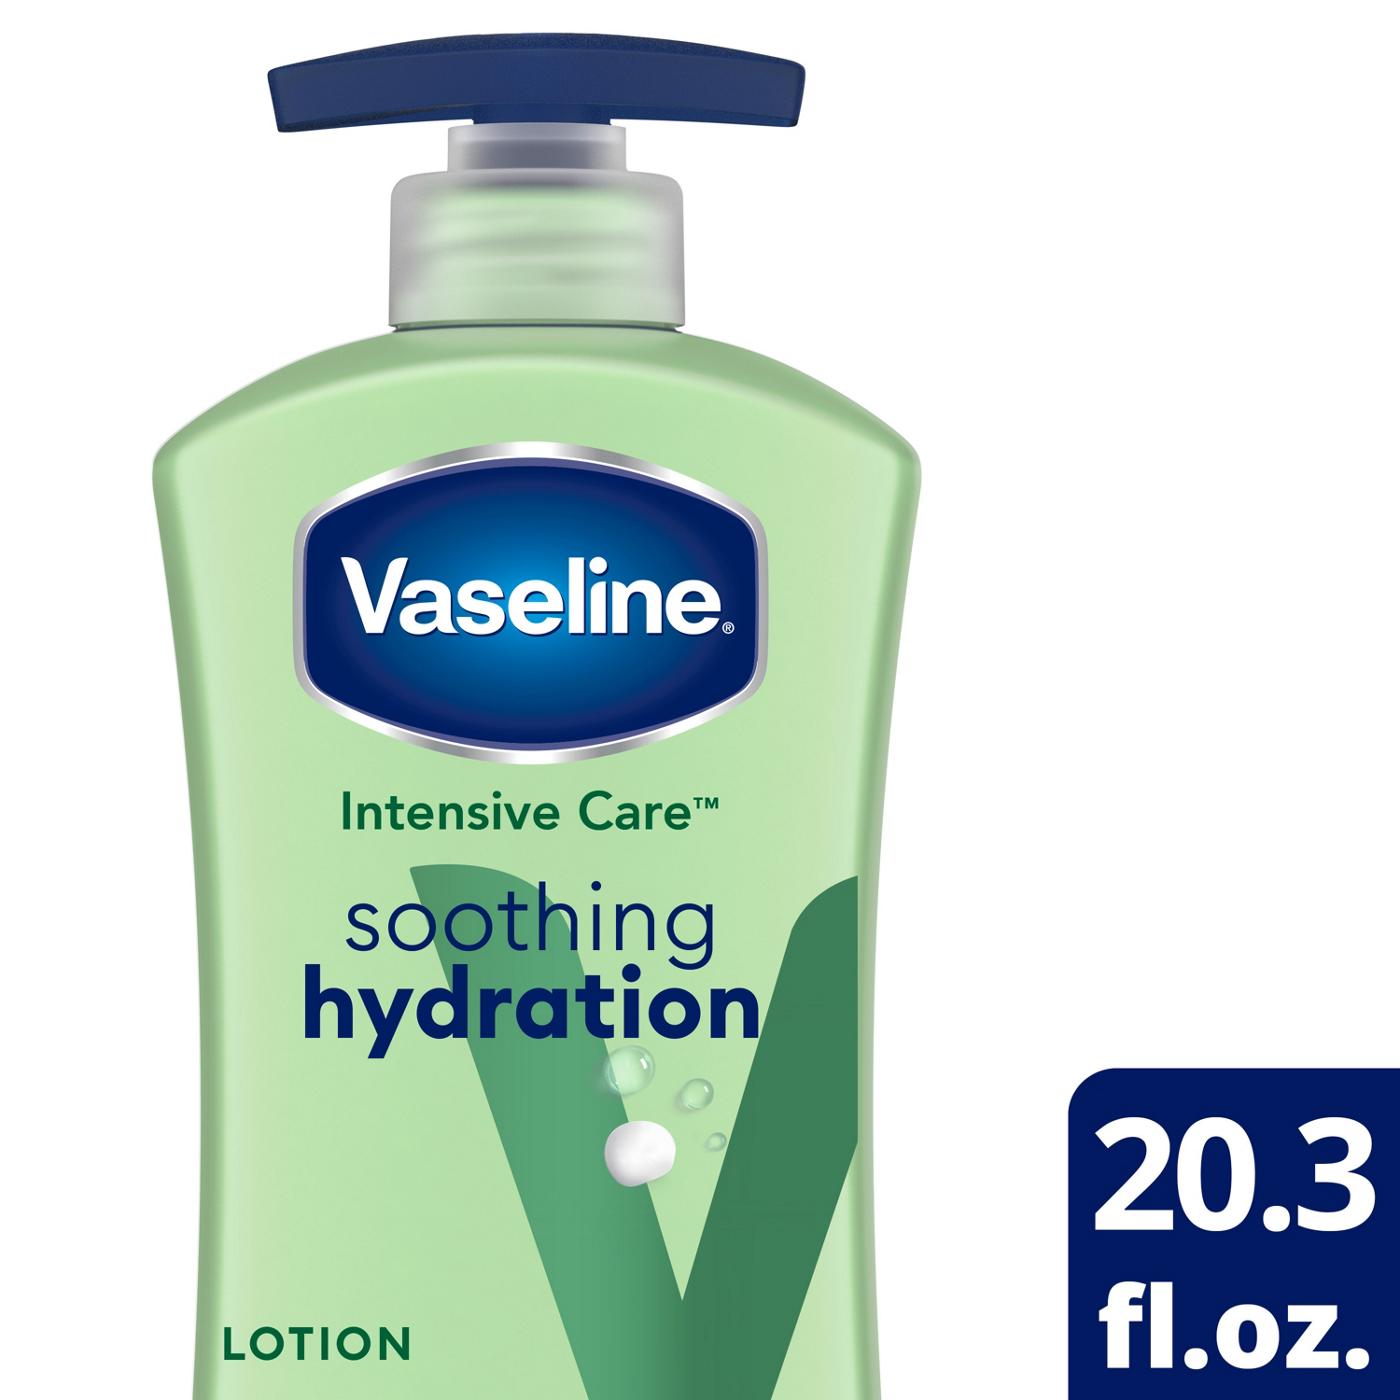 Vaseline Intensive Care Soothing Hydration Body Lotion; image 4 of 10